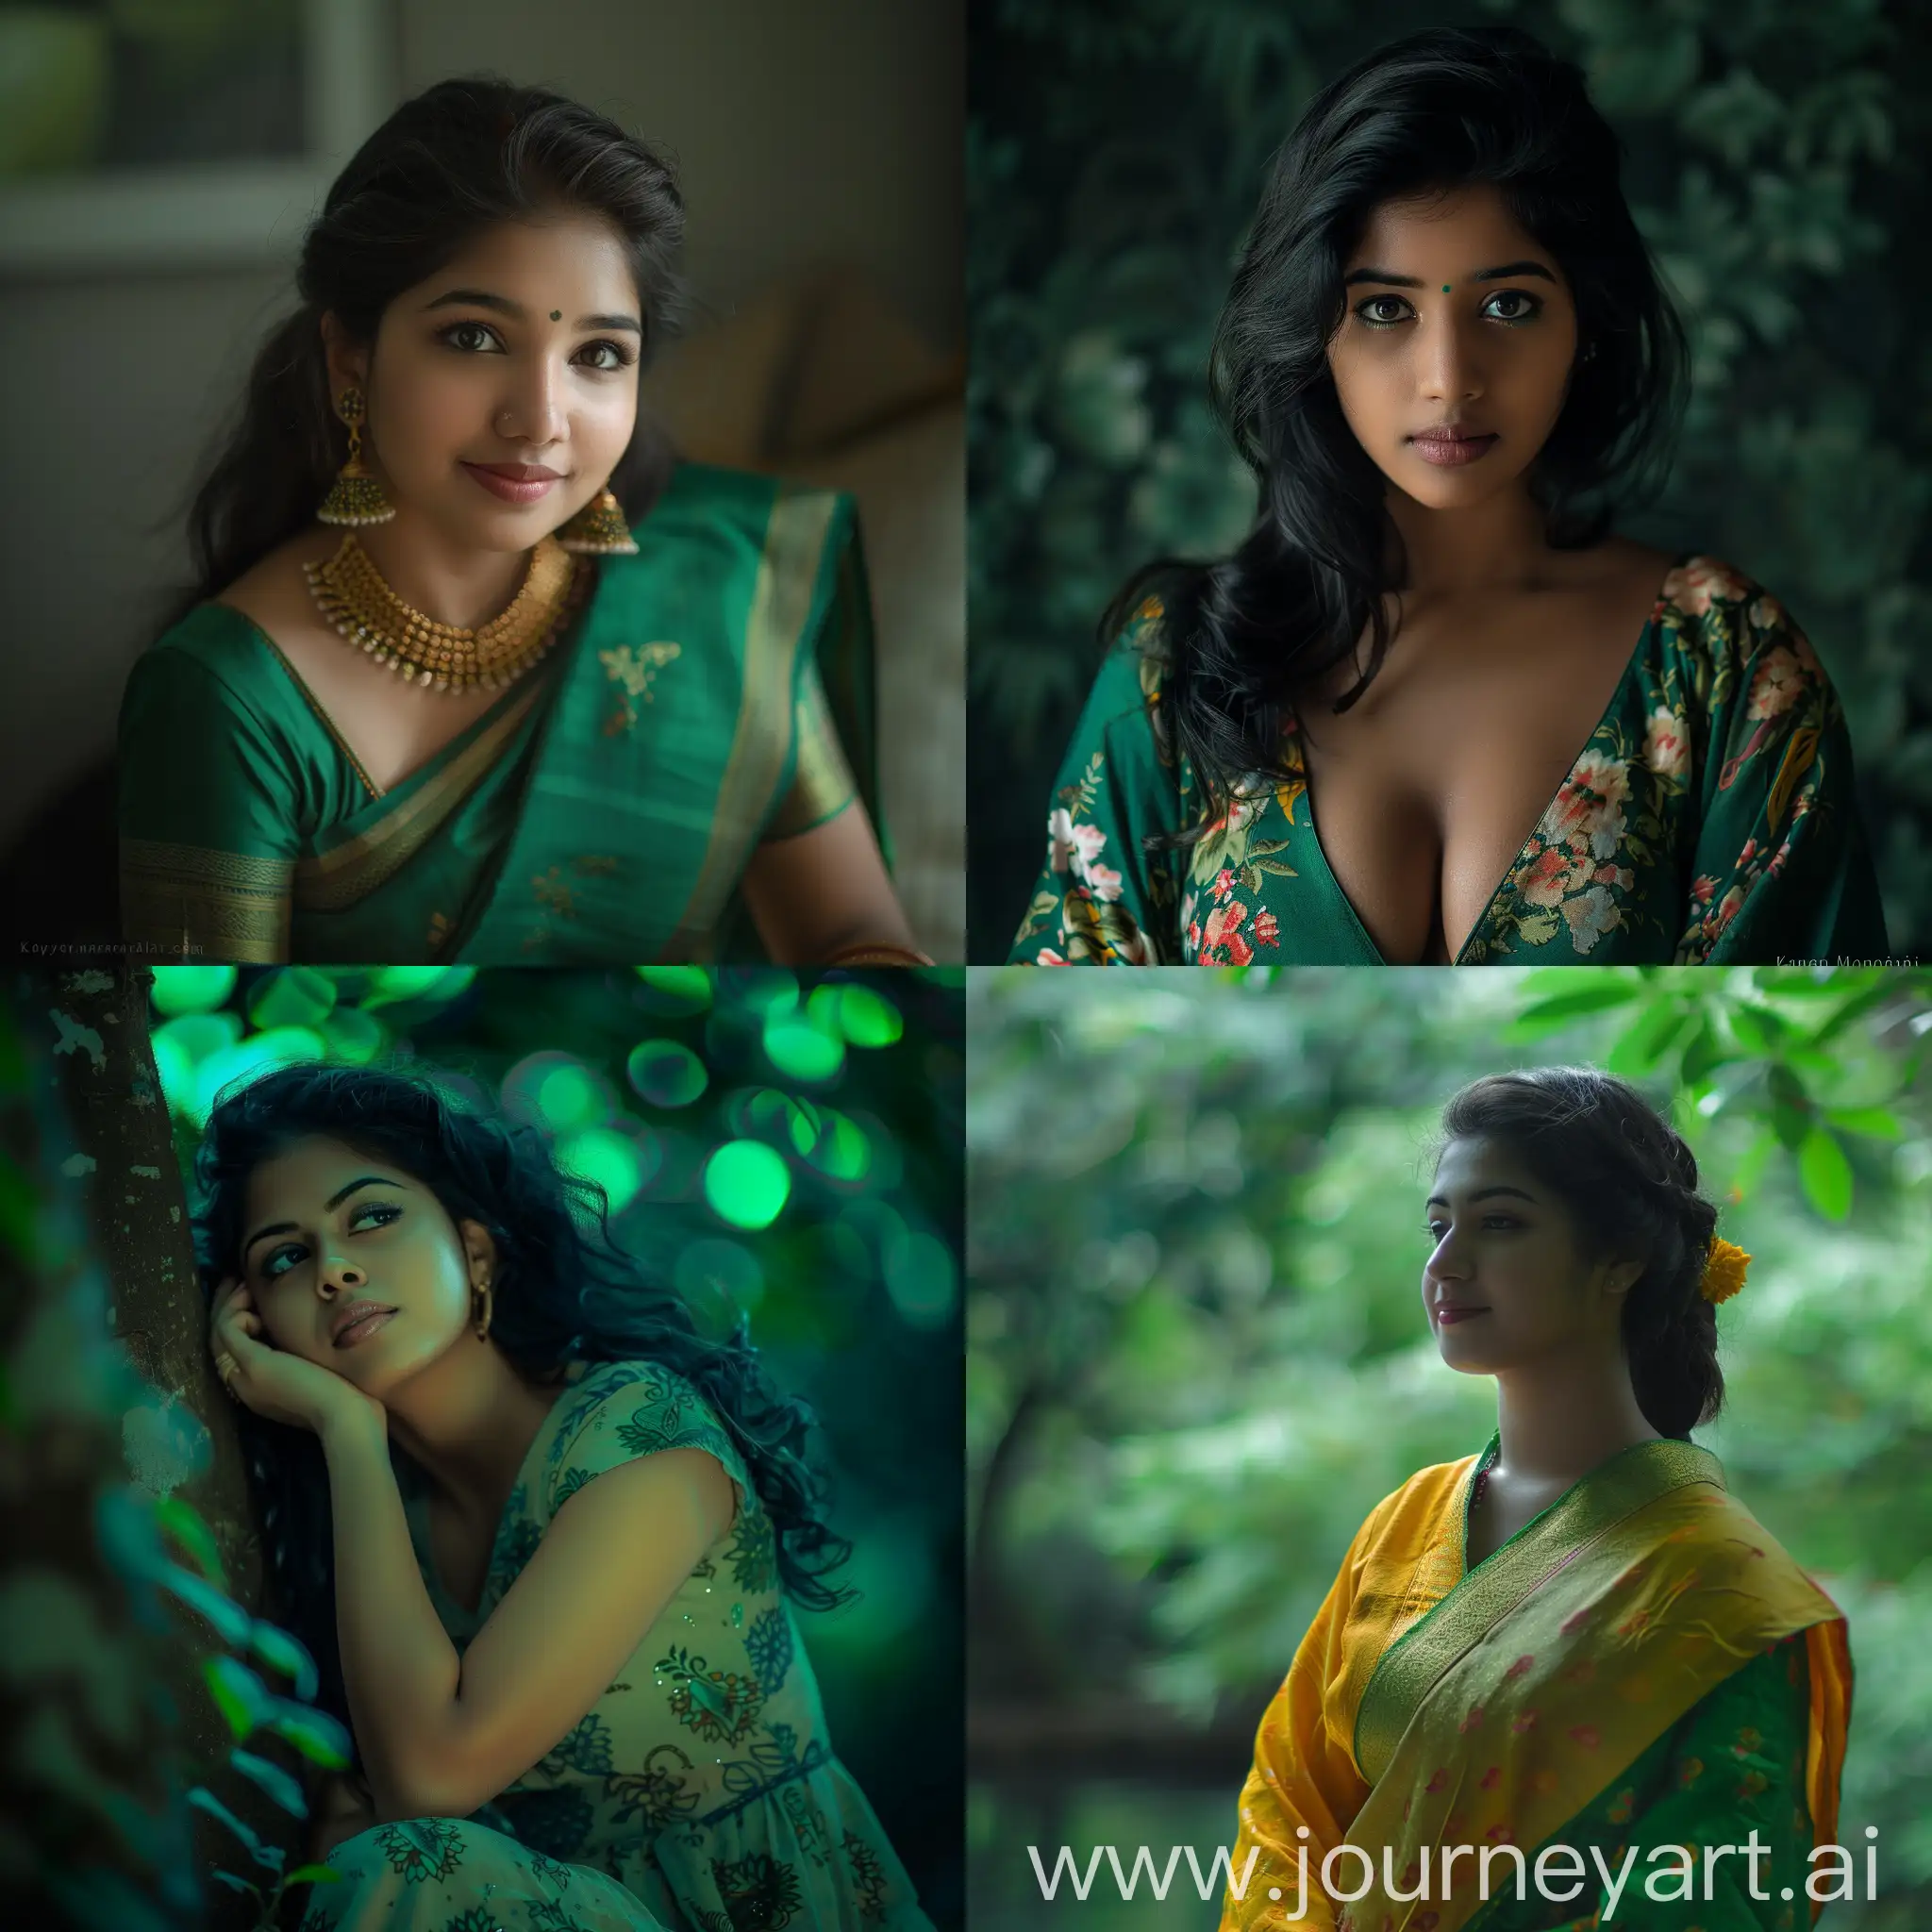 Stunning-Malayali-Woman-in-Green-Tones-Captivating-Beauty-from-Kerala-with-Japanese-Heritage